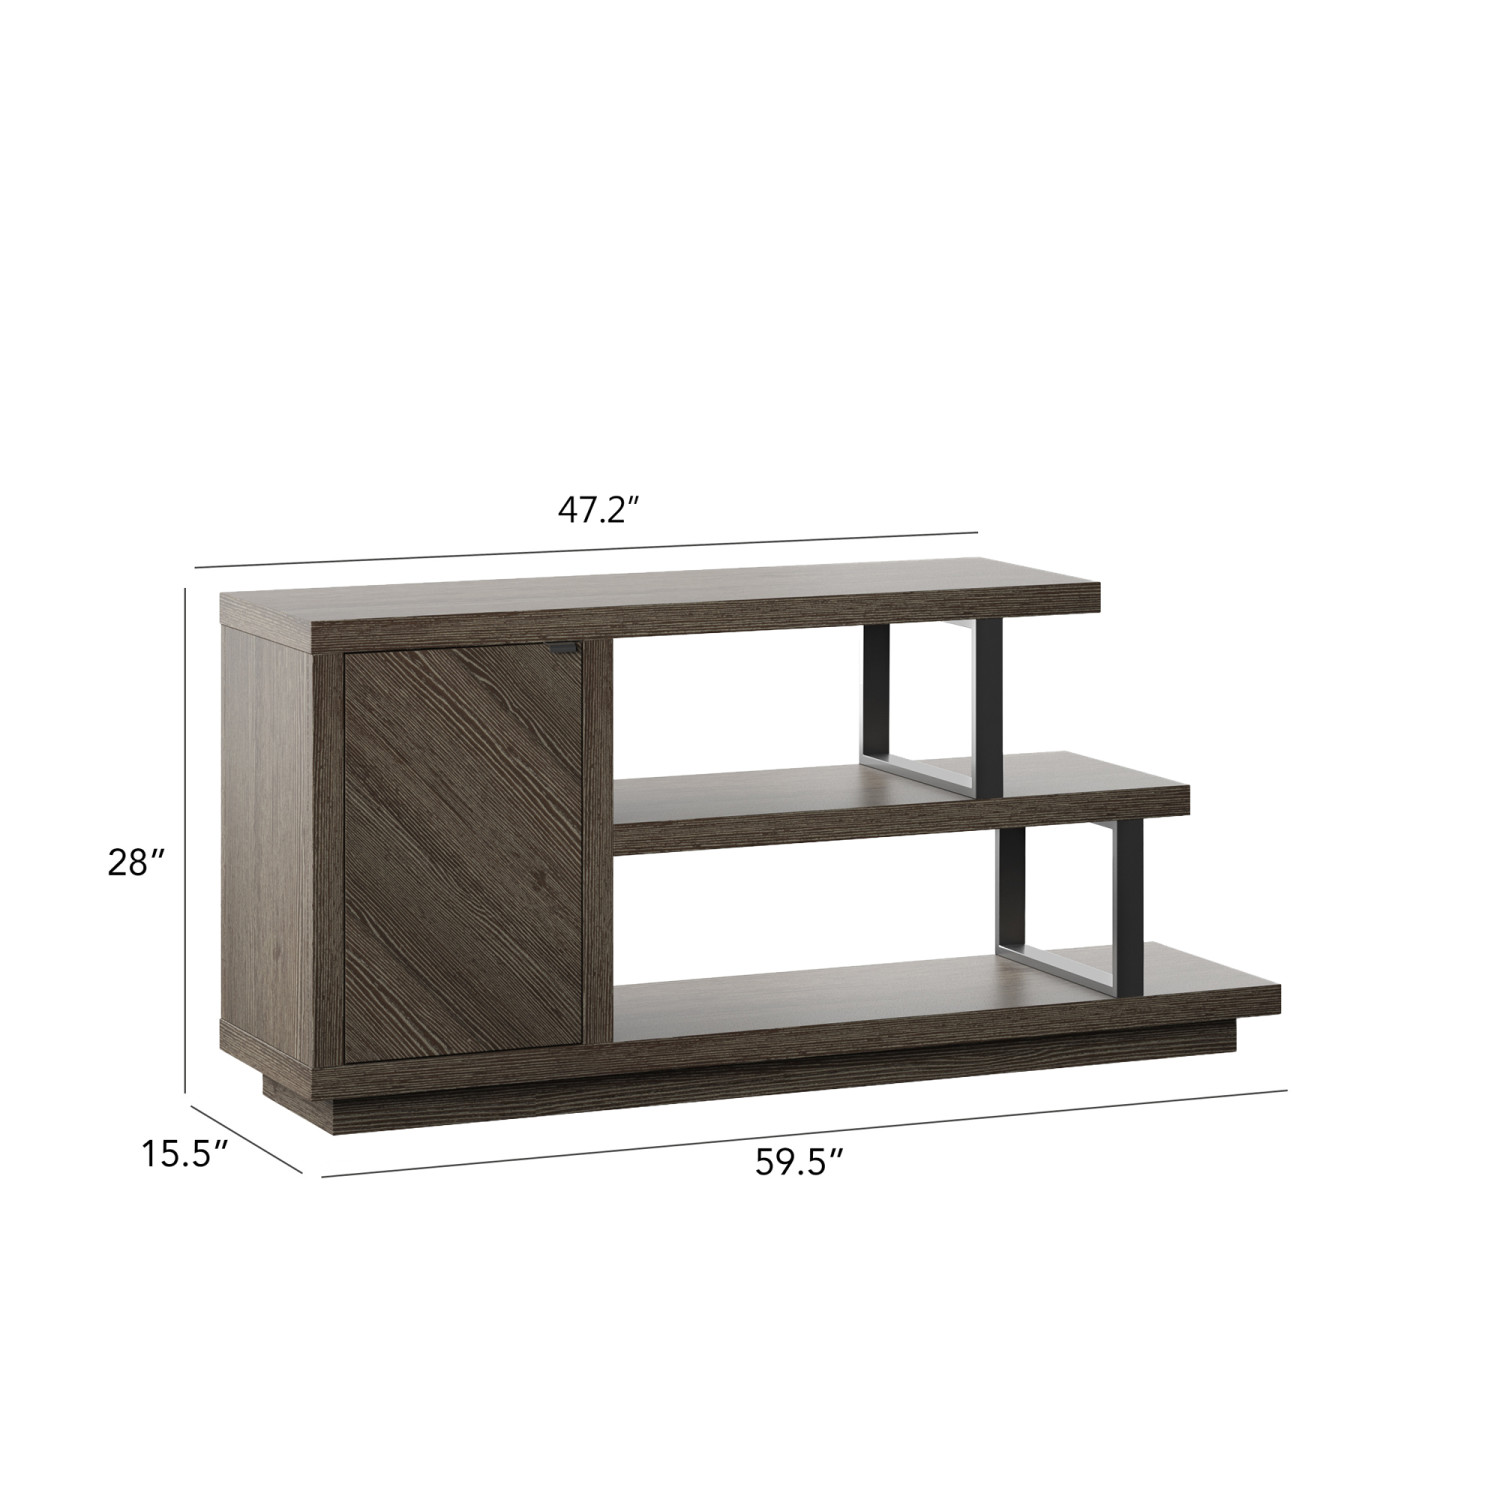 TV Stand for TVs up to 55” with Asymmetrical Shelves in Curtis Oak - image 2 of 14